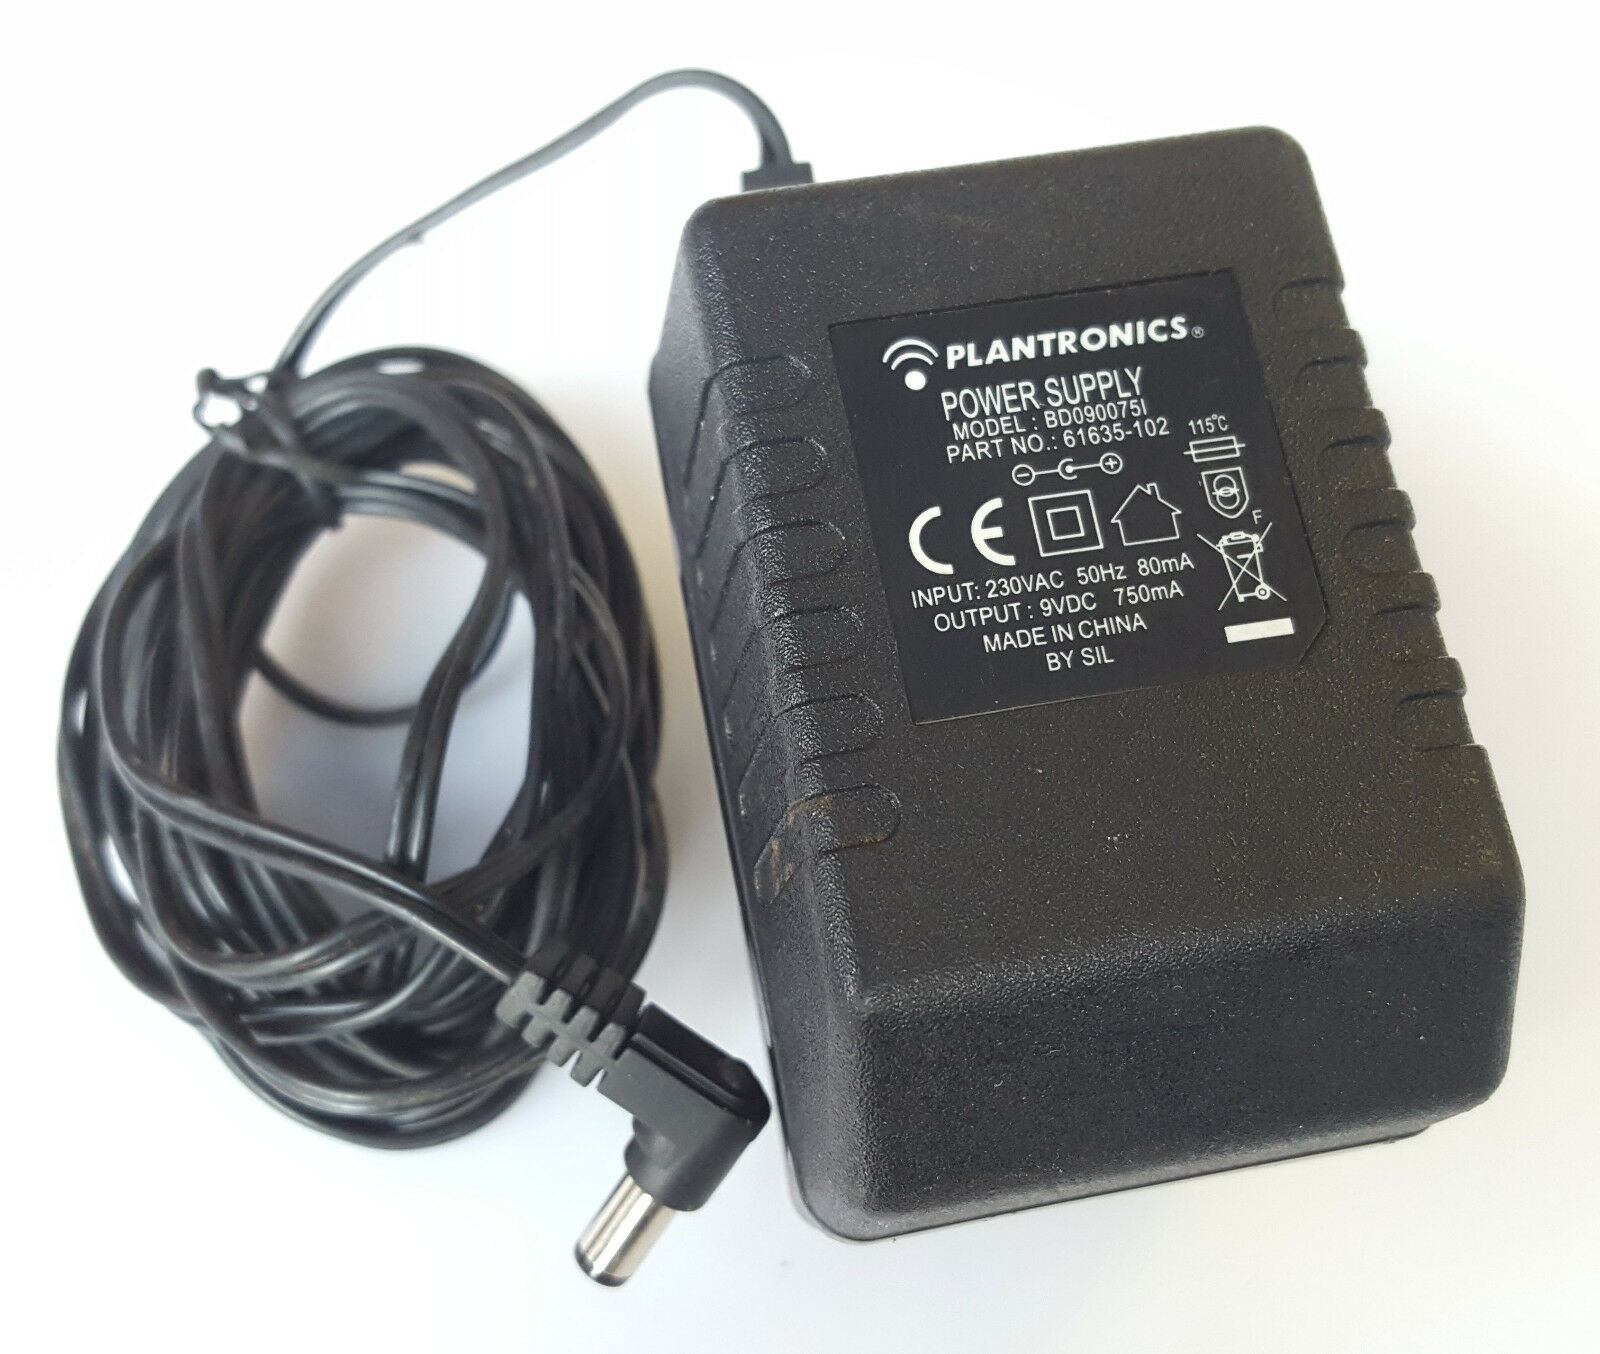 PLANTRONICS BD090075I AC/DC POWER ADAPTER 9V 0.75A UK PLUG 61635-102 Country/Region of Manufacture: China MPN: 61635